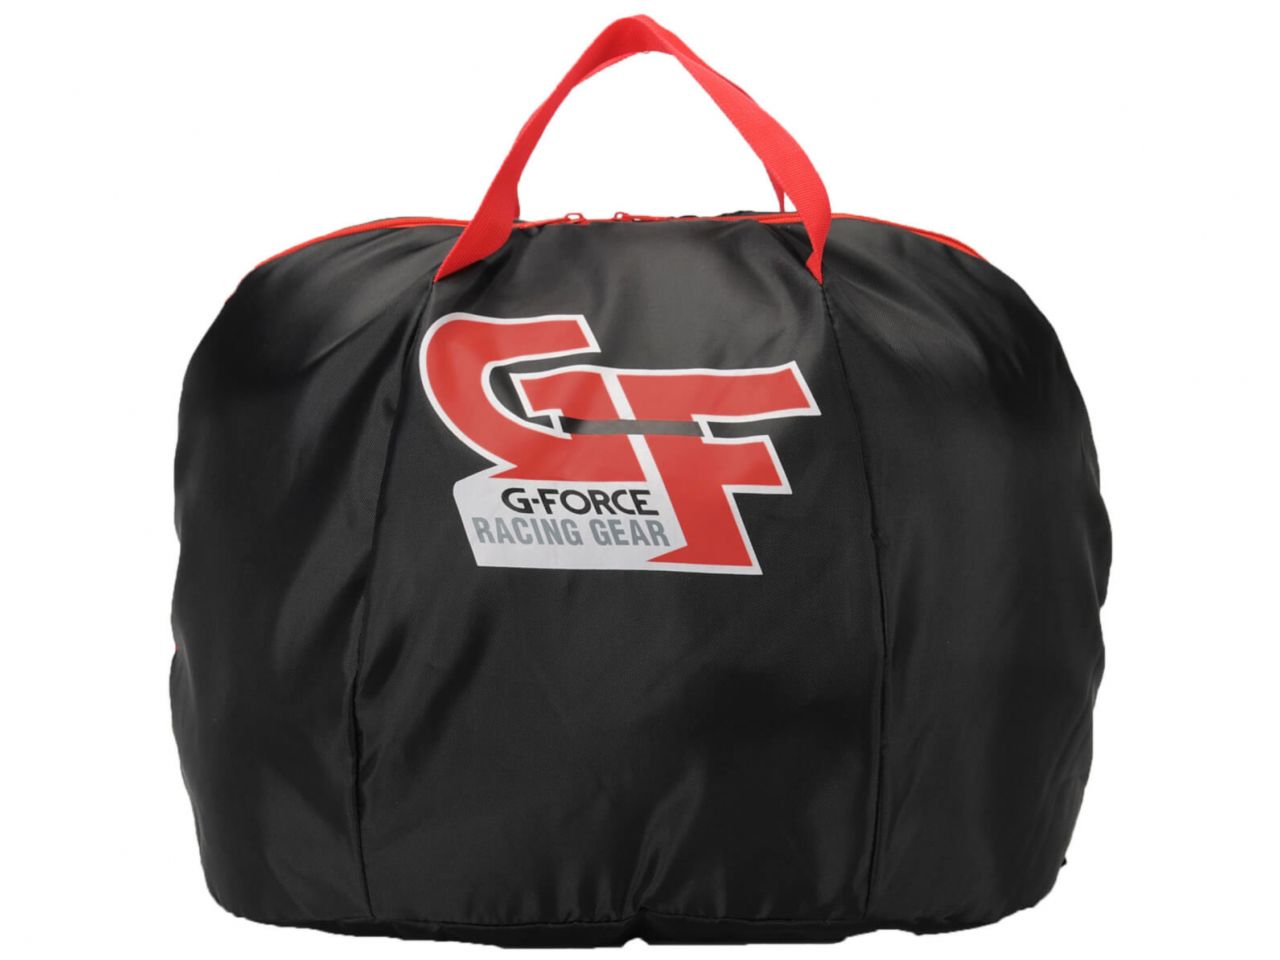 G-Force Gear Bags 1006 Item Image